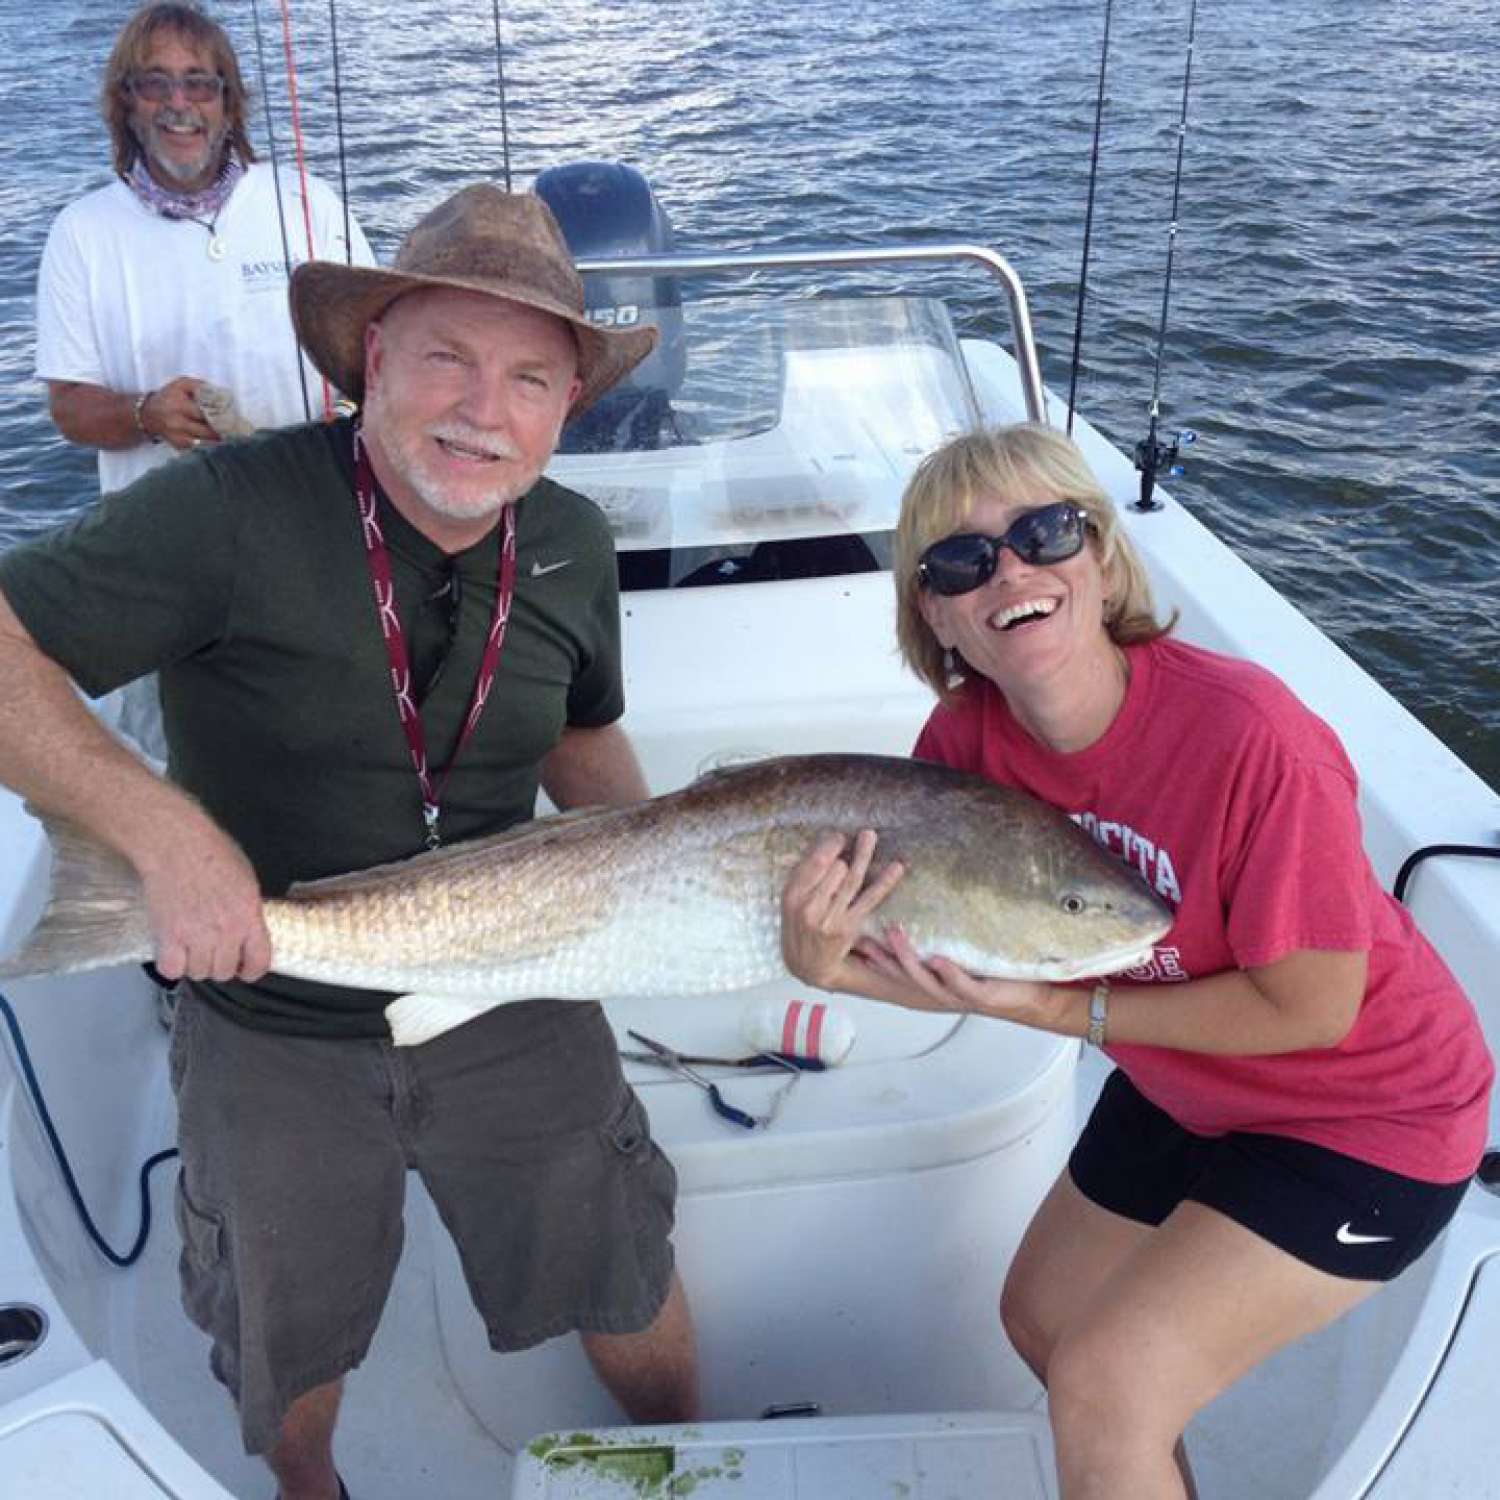 Husband and wife, the O'Neil's with her first Redfish from Galveston Bay.